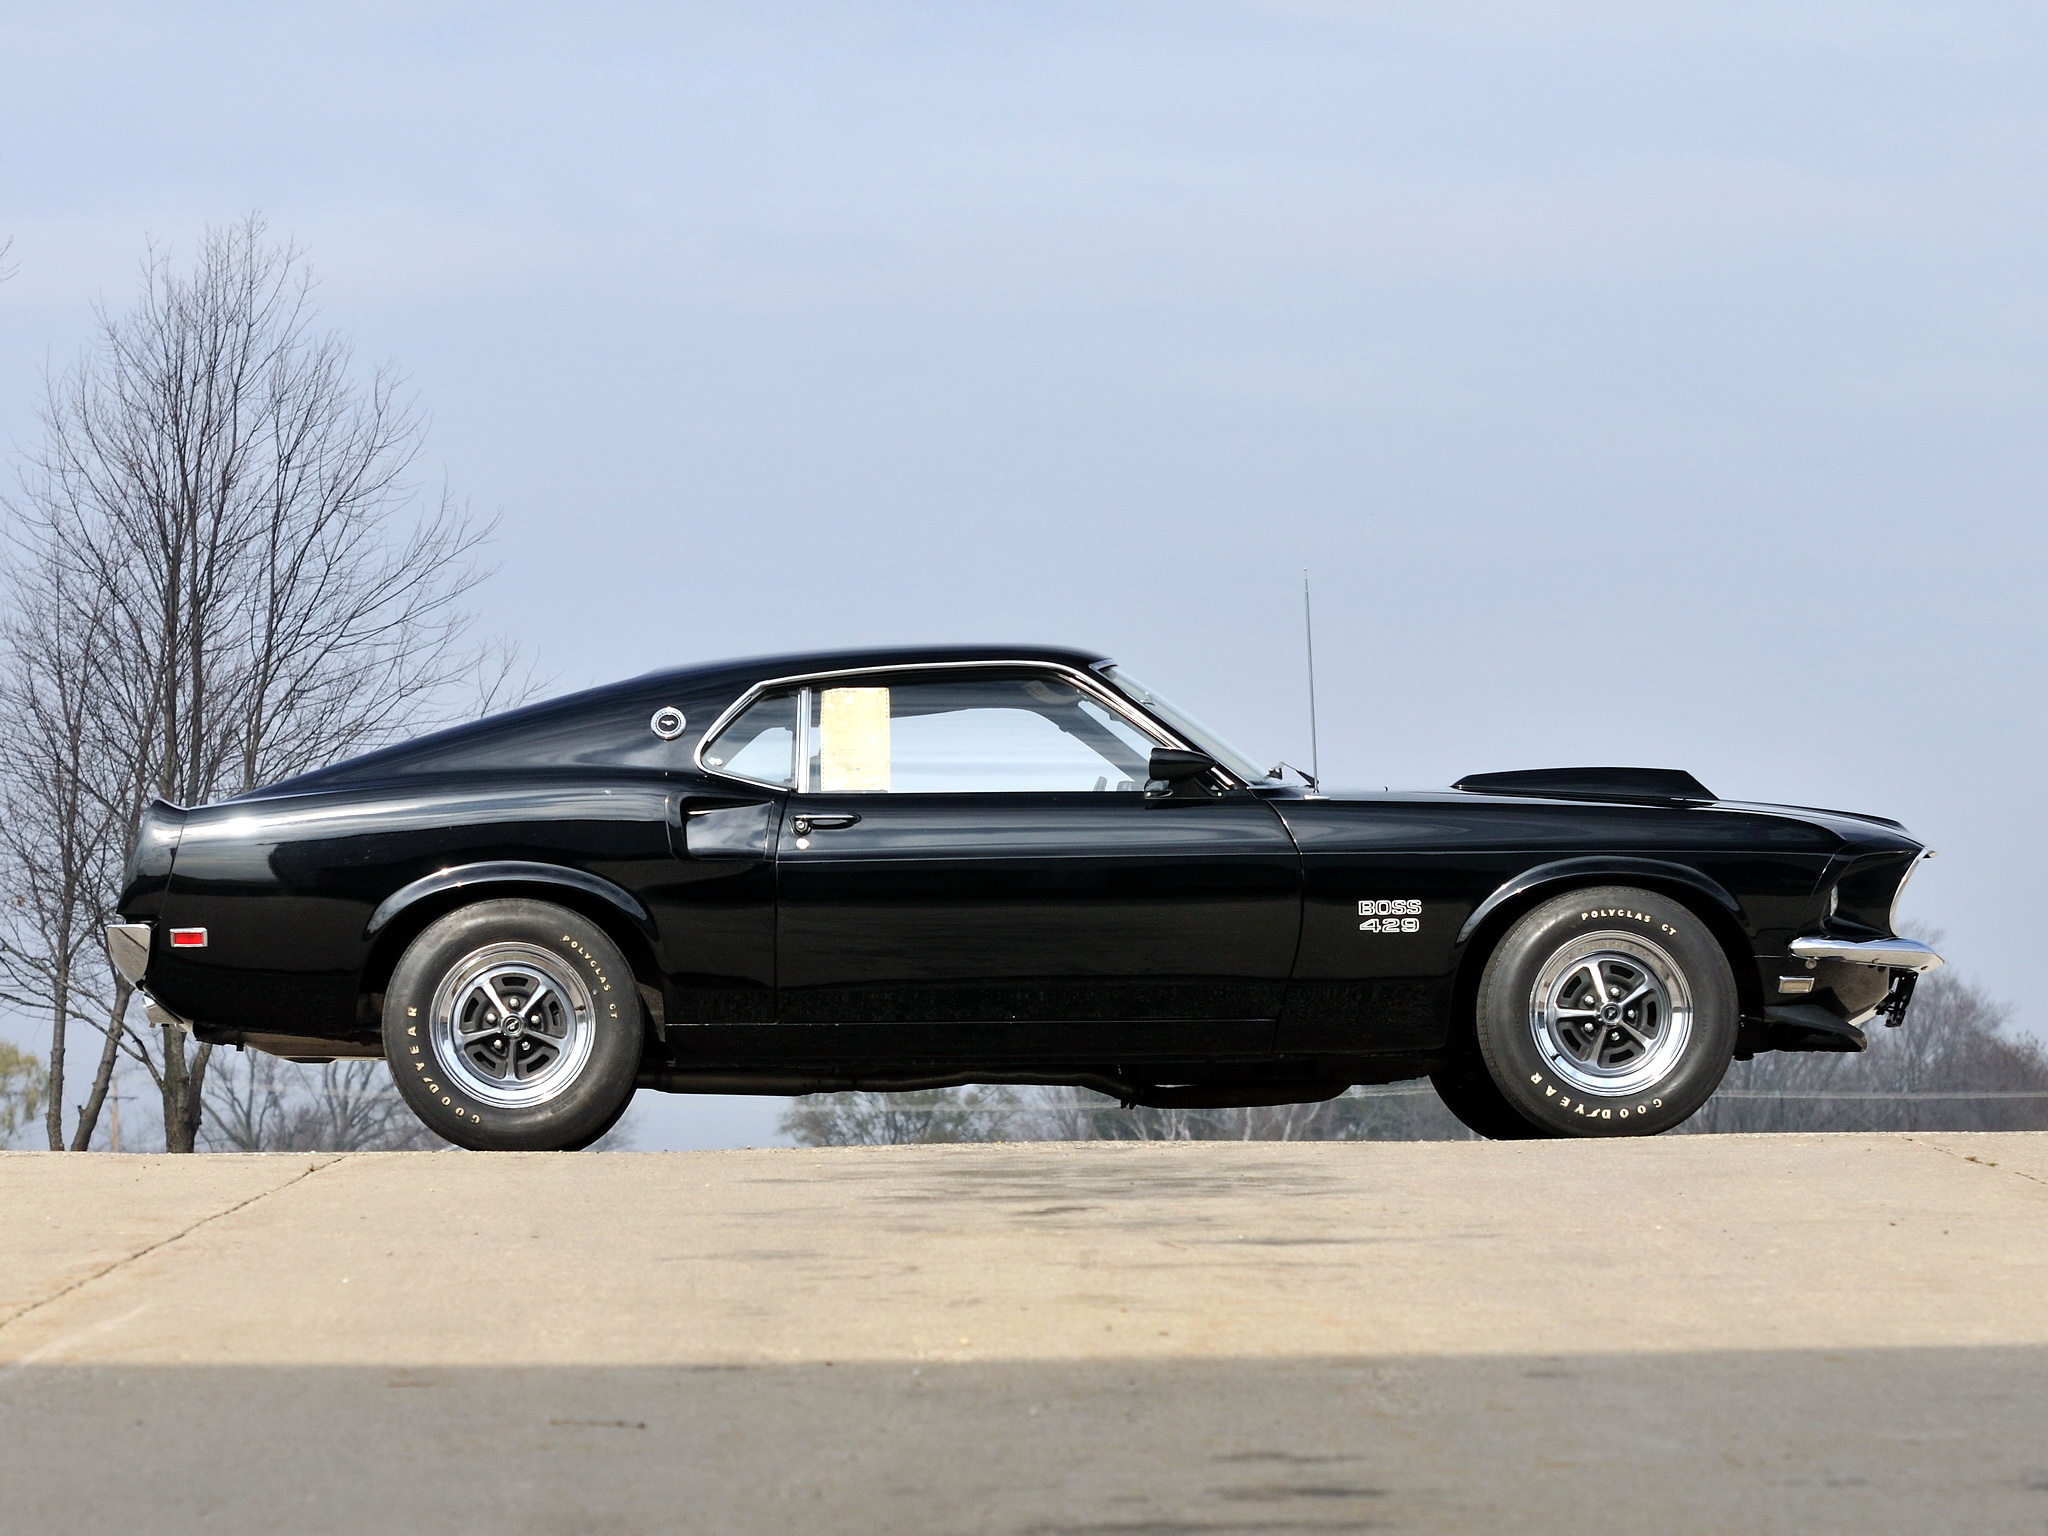 1969, Mustang, Boss, 429, Ford, Muscle, Classic Wallpaper